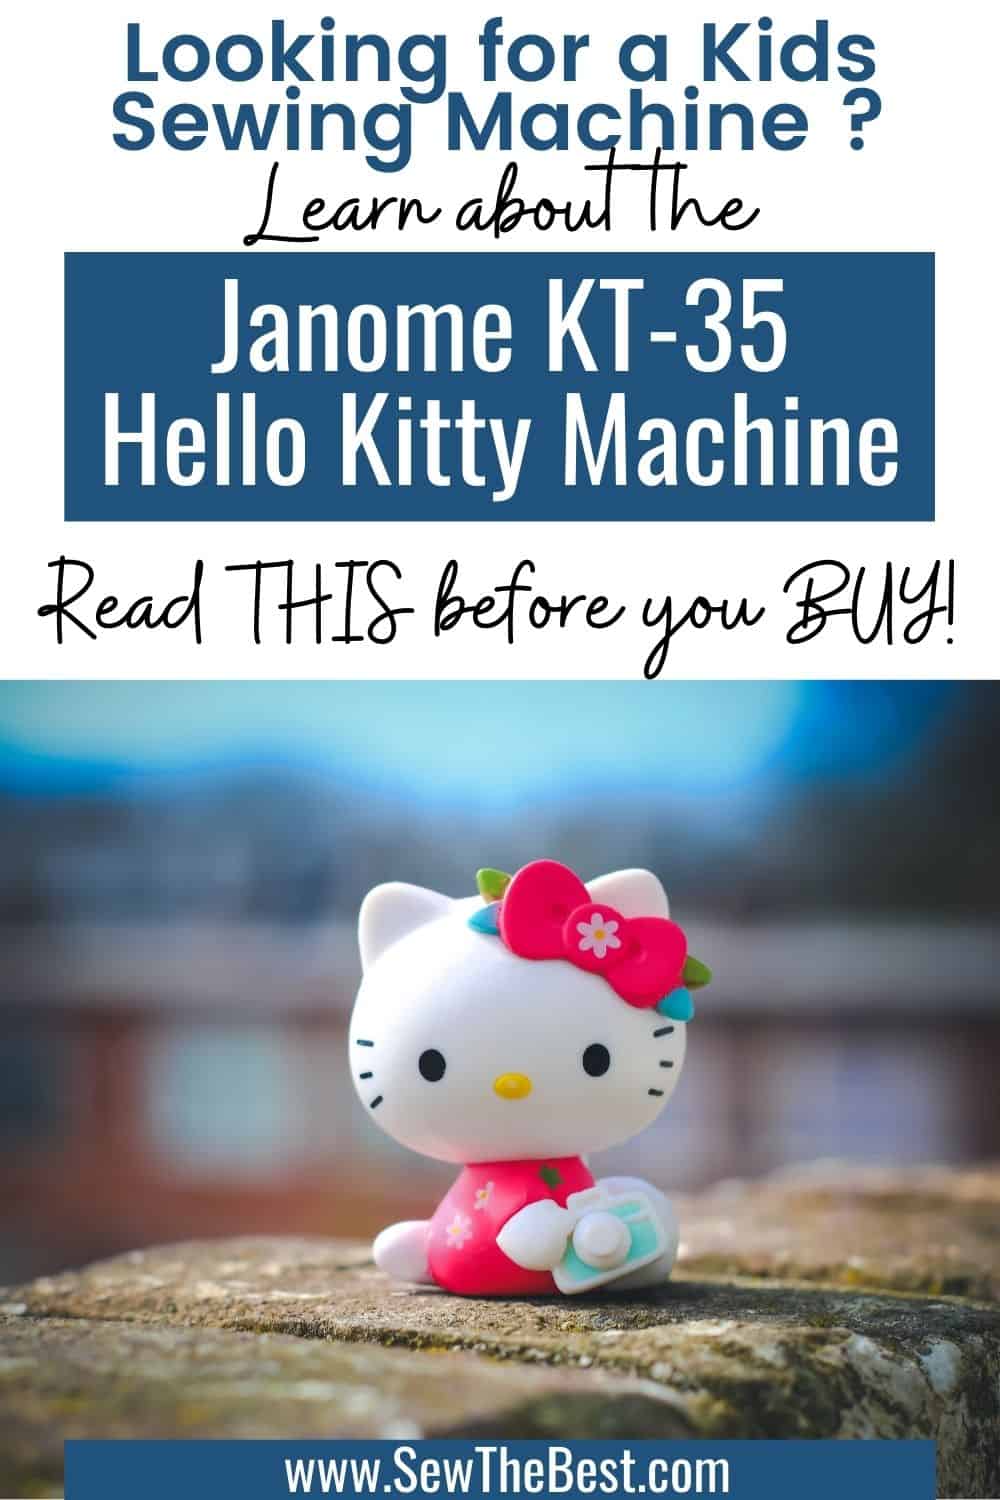 Accessories missing] Hello Kitty Sewing Machine KT-35 Sanrio Character  Connectors, Goods / Accessories